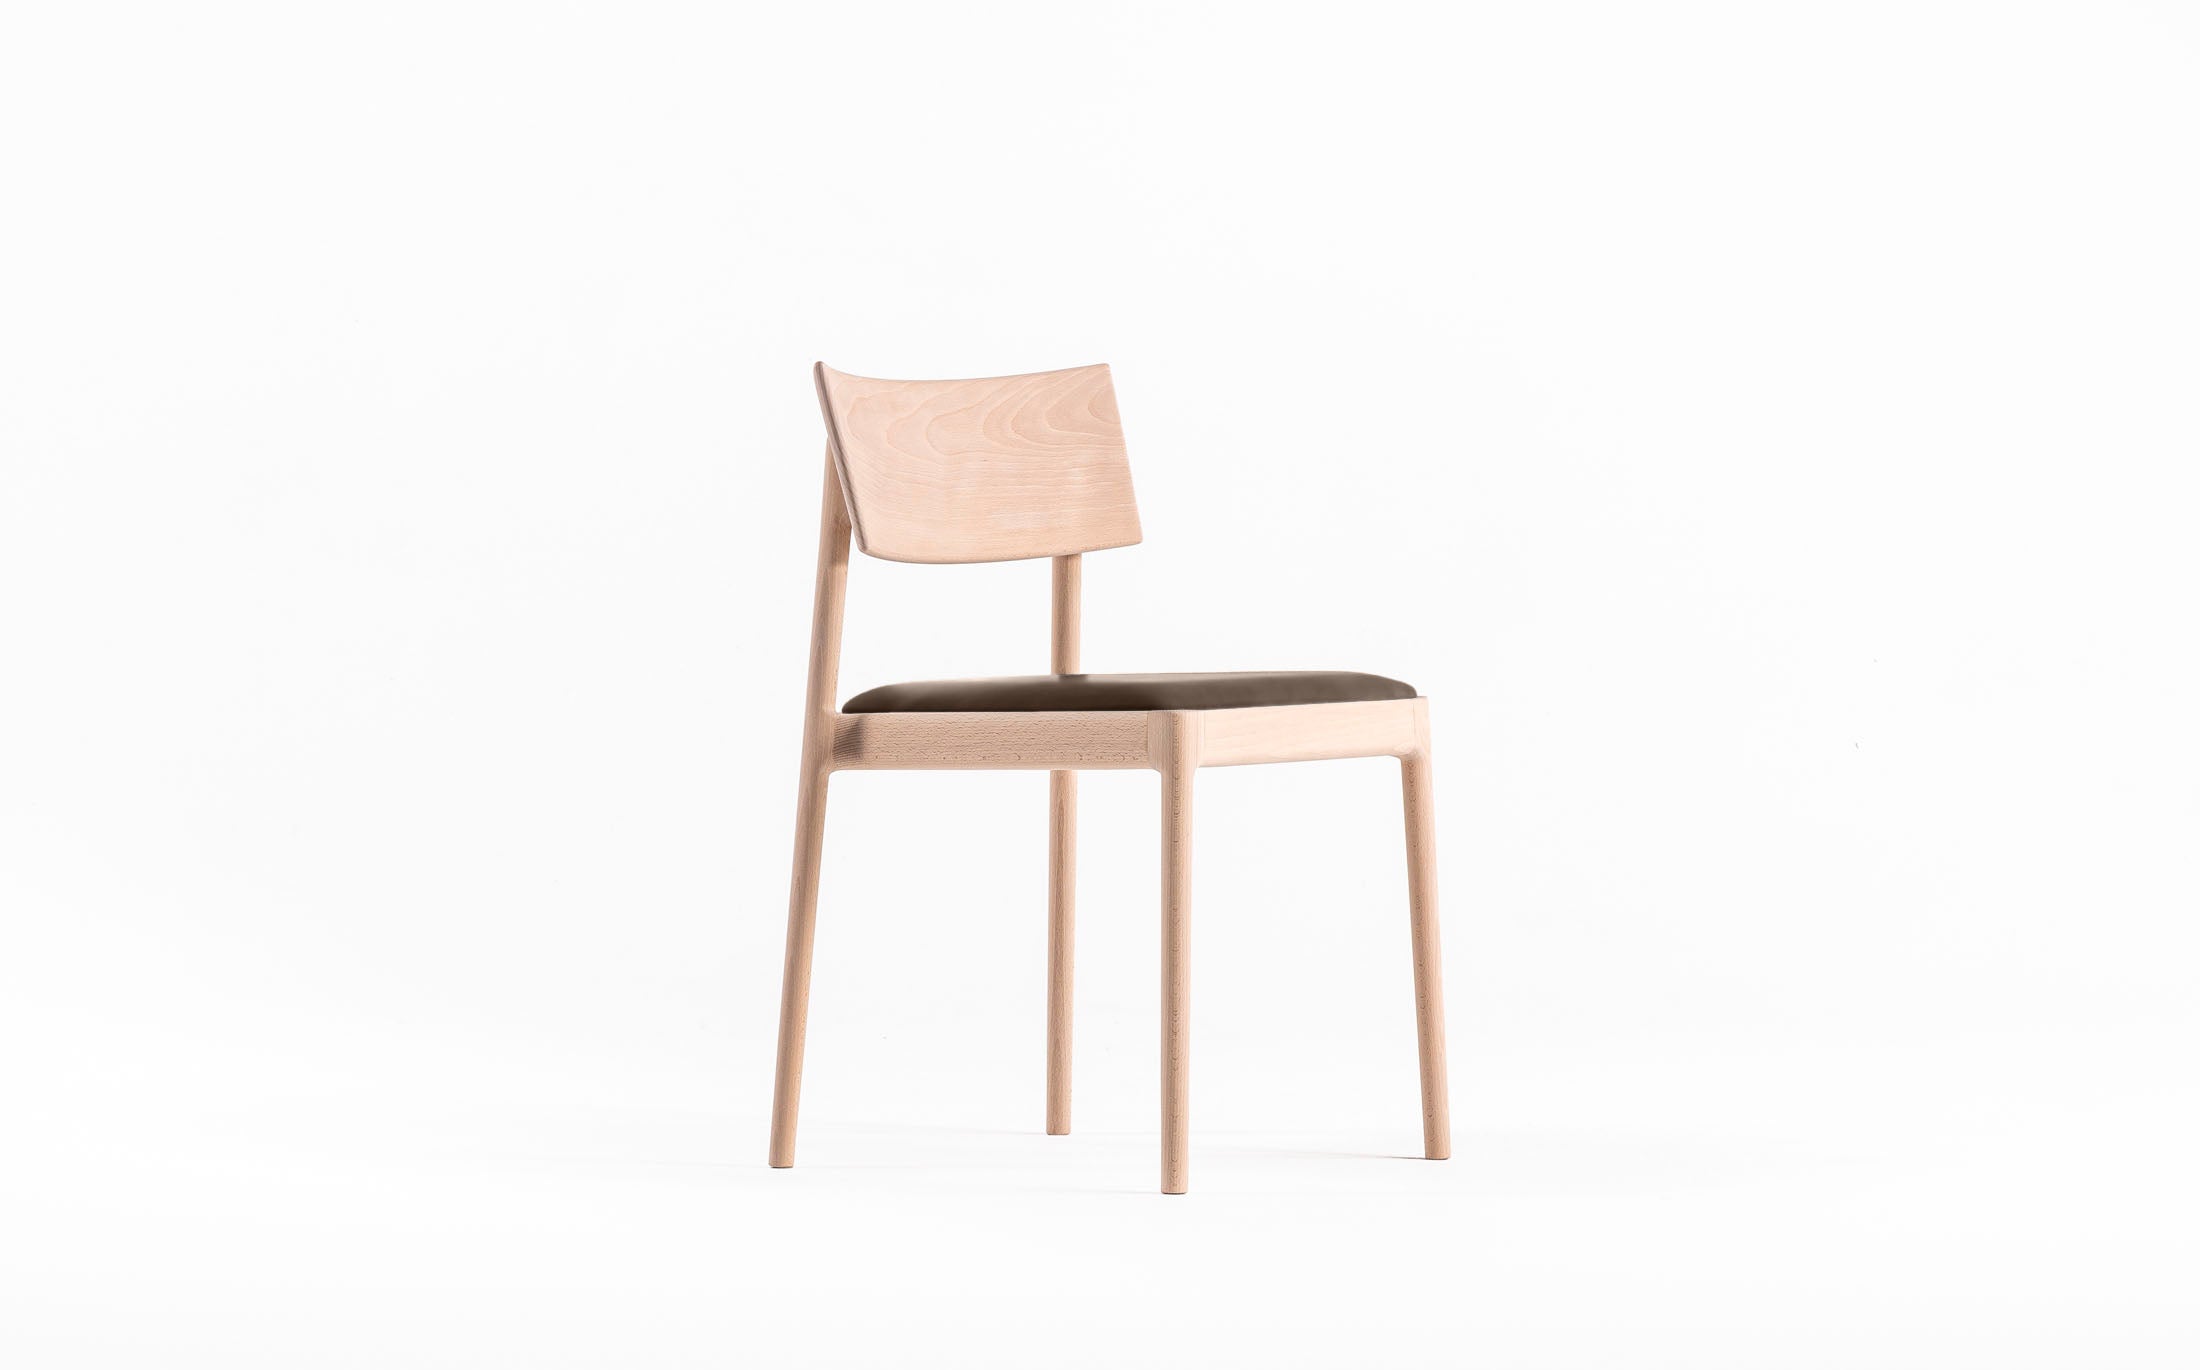 The stacking light chair #Seat materials_smooth leather 40103